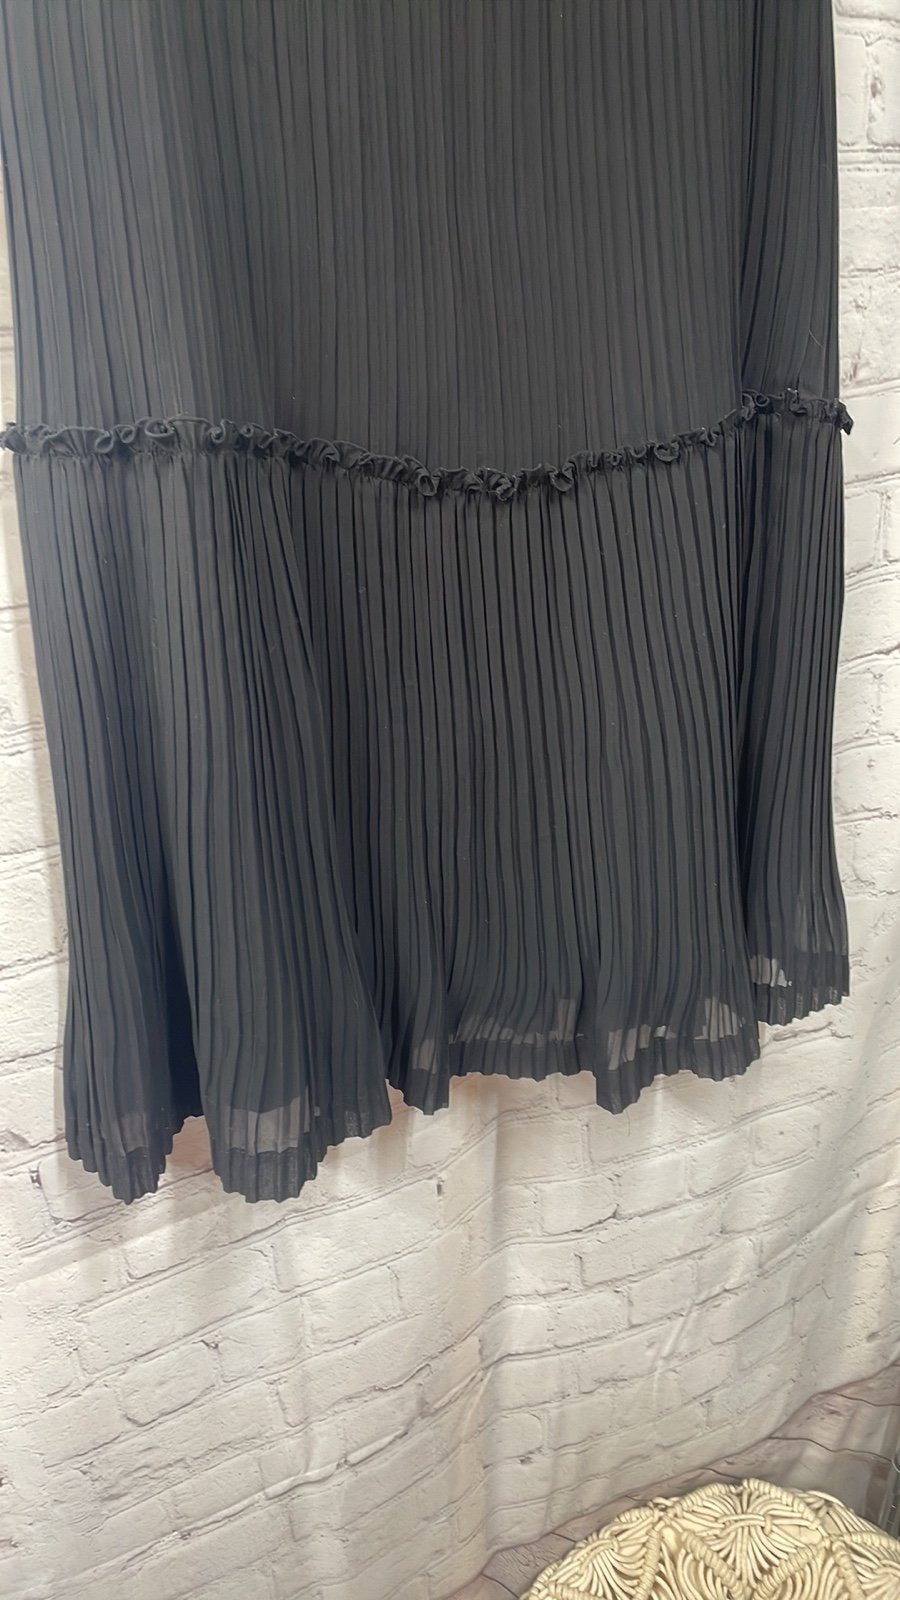 The Best Seller Cato black sheer tiered crinkled pleats size large maxi/midi skirt NTCHgm1gD just for you